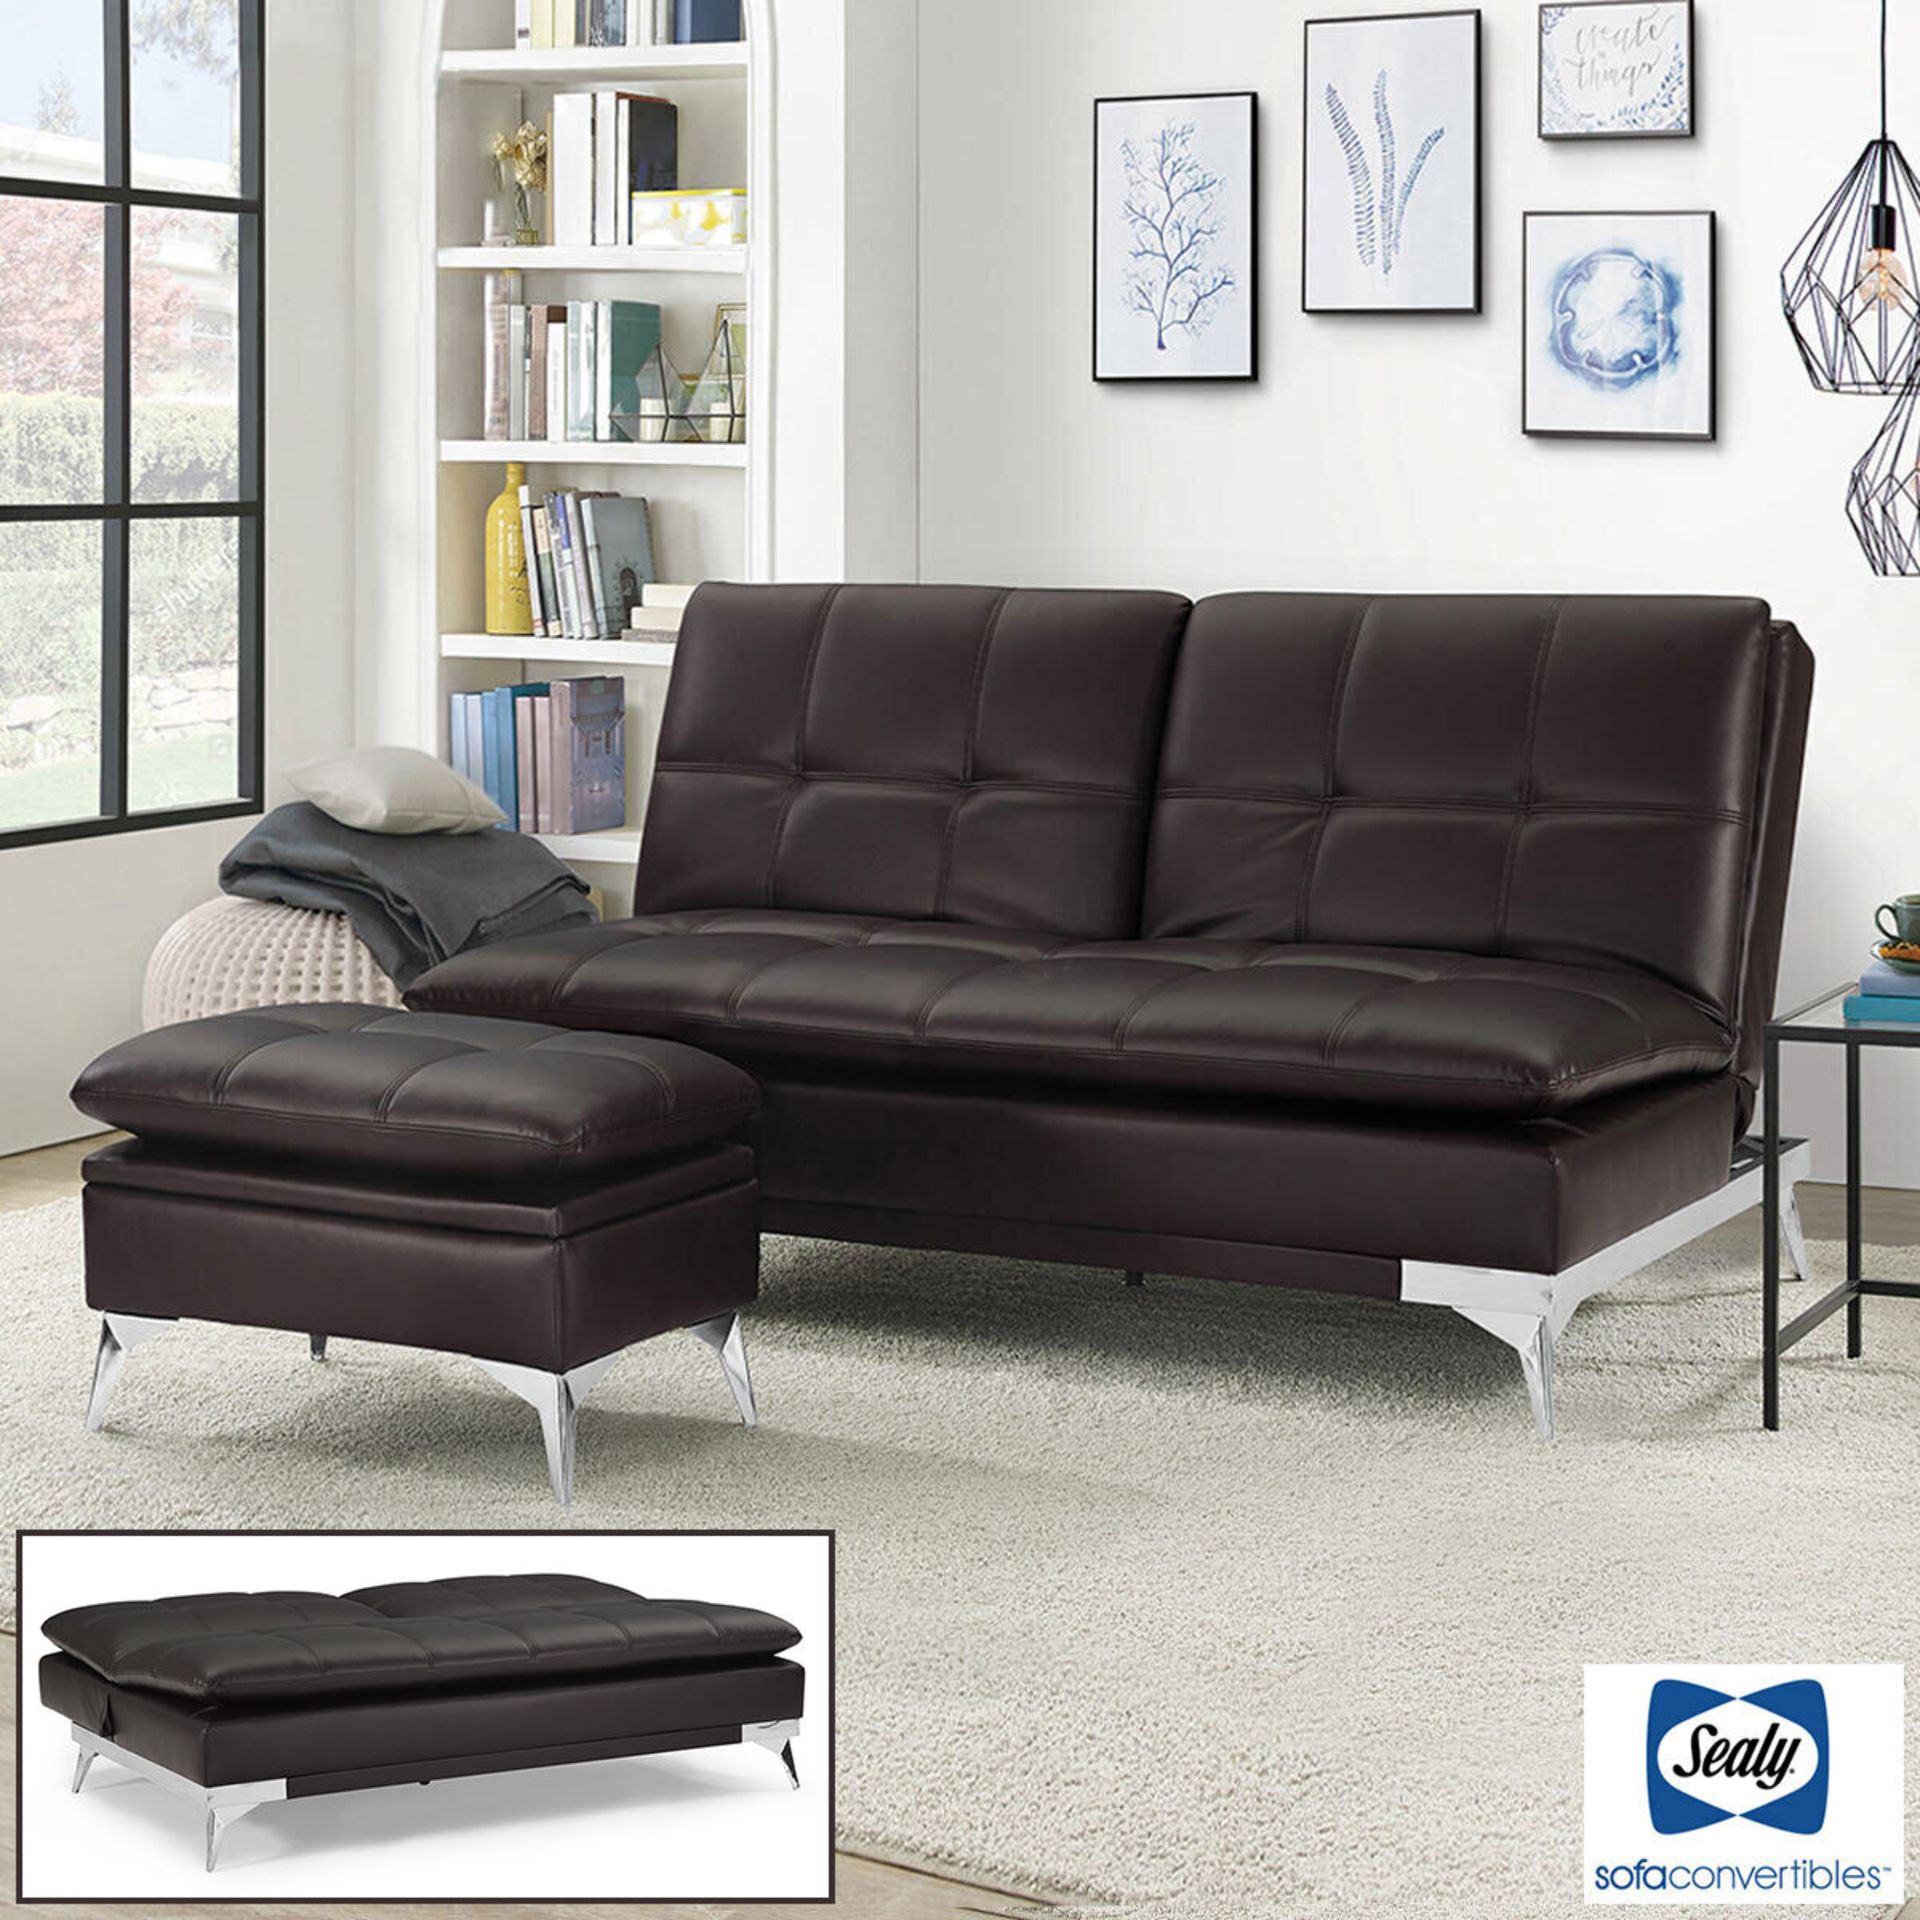 1 SEALY BROWN CONVERTIBLE EUROLOUNGER WITH STORAGE OTTOMAN RRP Â£749 (PICTURES FOR ILLUSTRATION